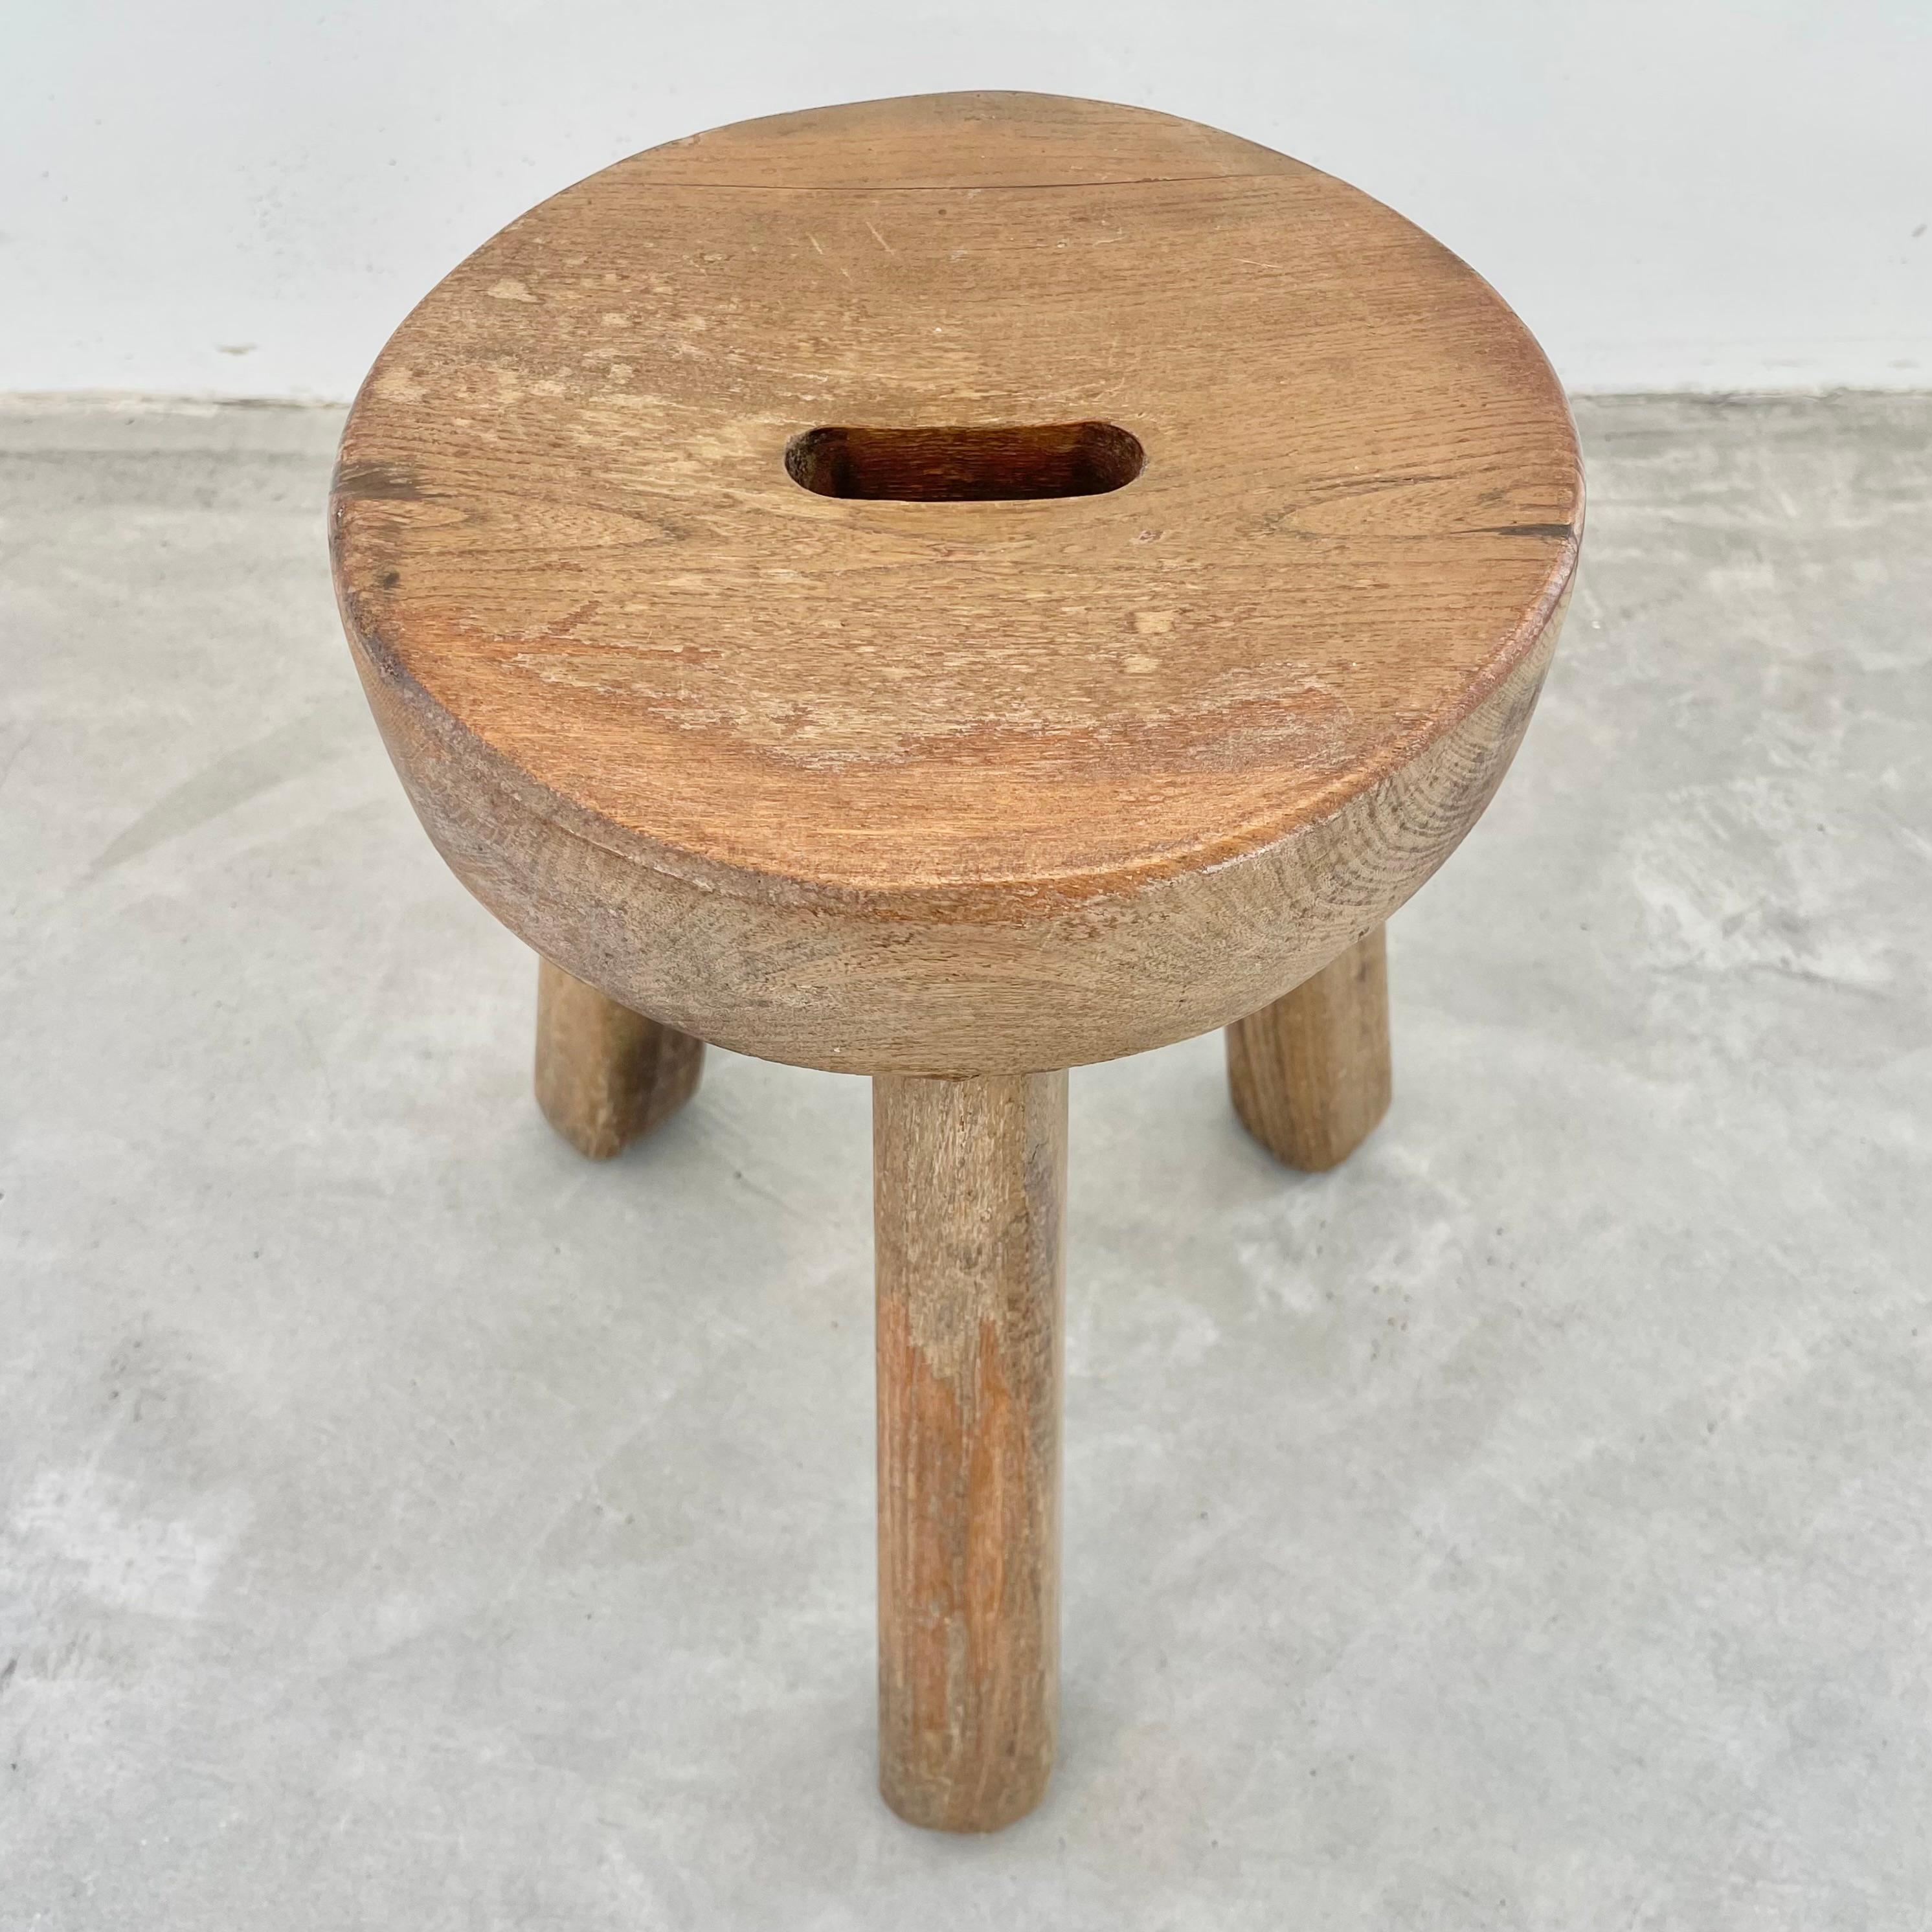 Unique tripod stool made in France, circa 1970s. Substantial and chunky round seat with three sturdy club legs that taper out at the bottom. Oval hole cut out in the middle of the seat as a handle. Perfect patina and age to this piece. Functional